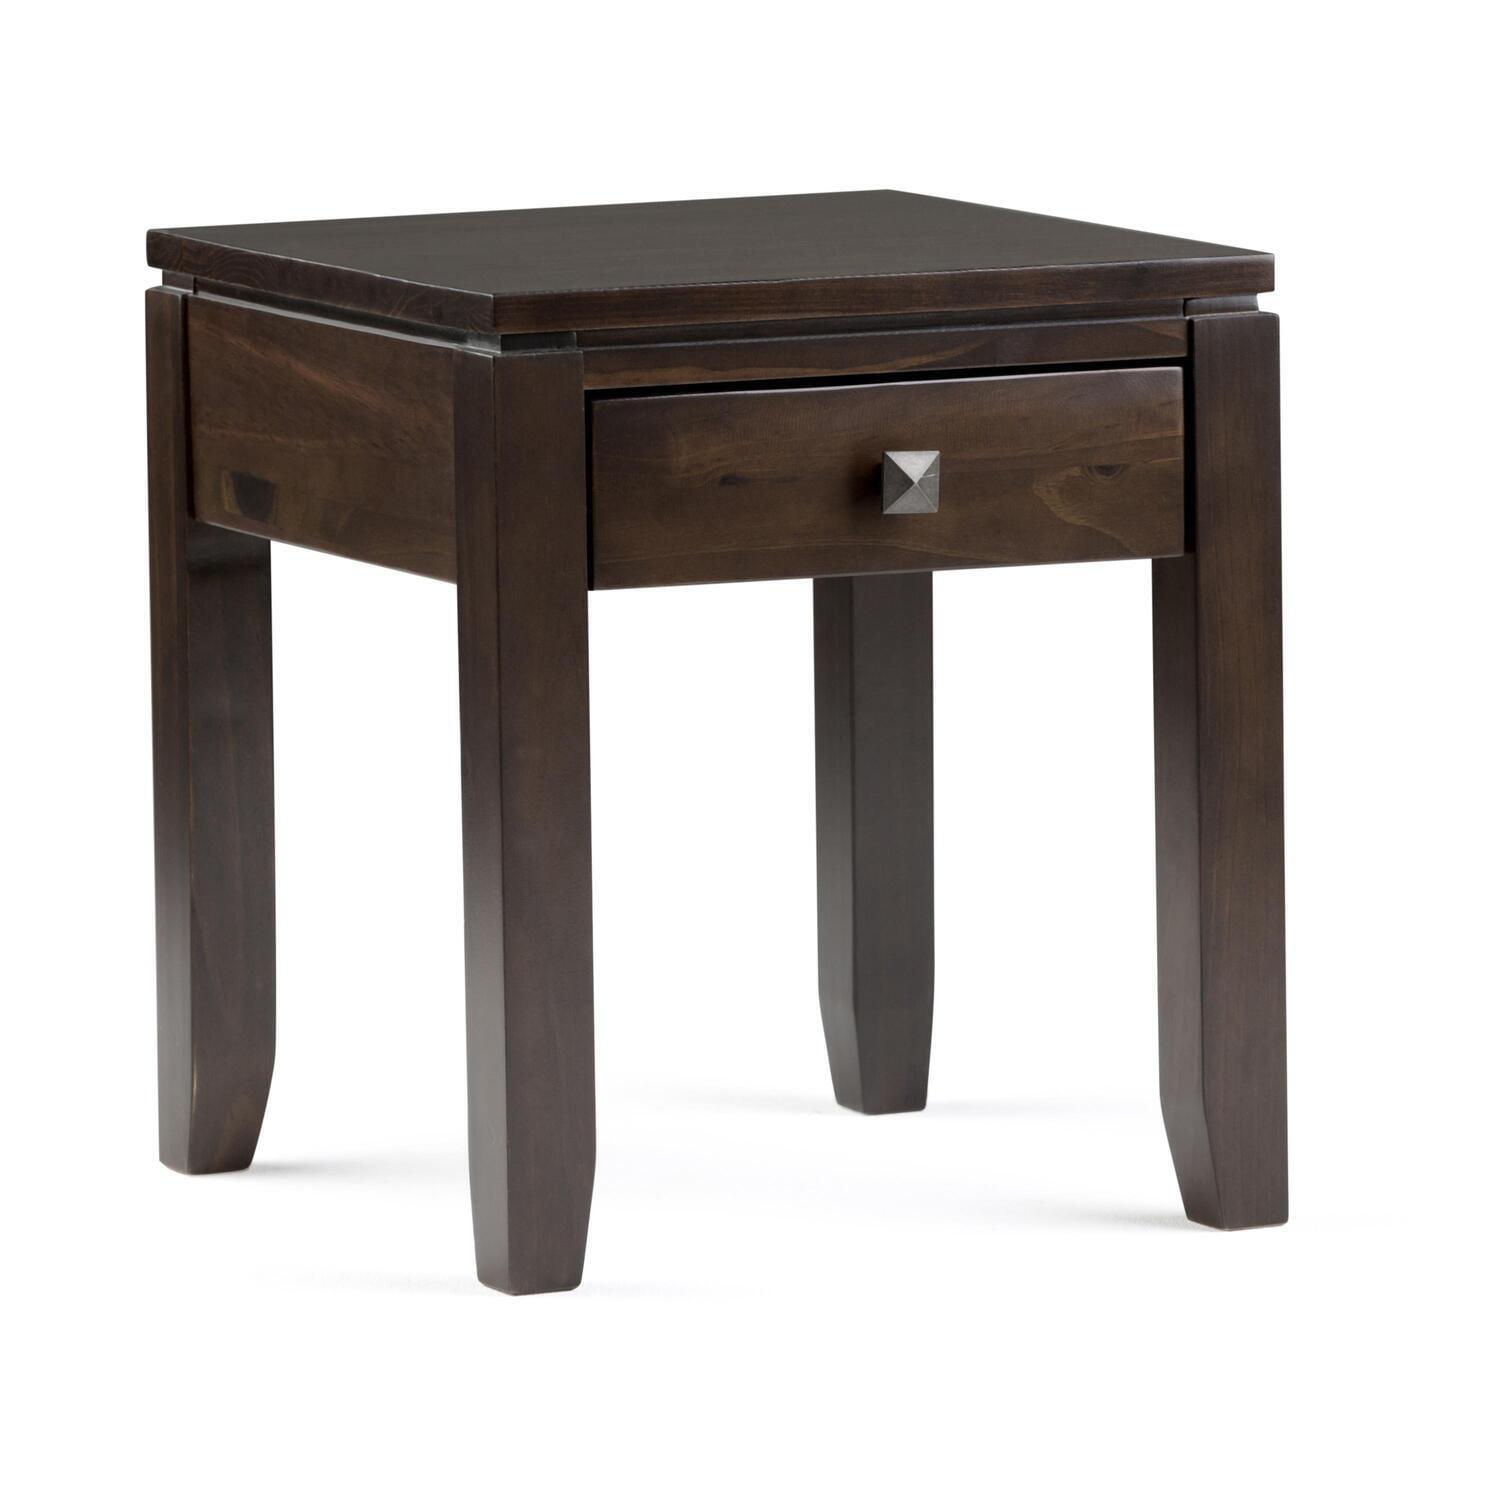 Cosmopolitan Compact Mahogany End Table with Storage Drawer